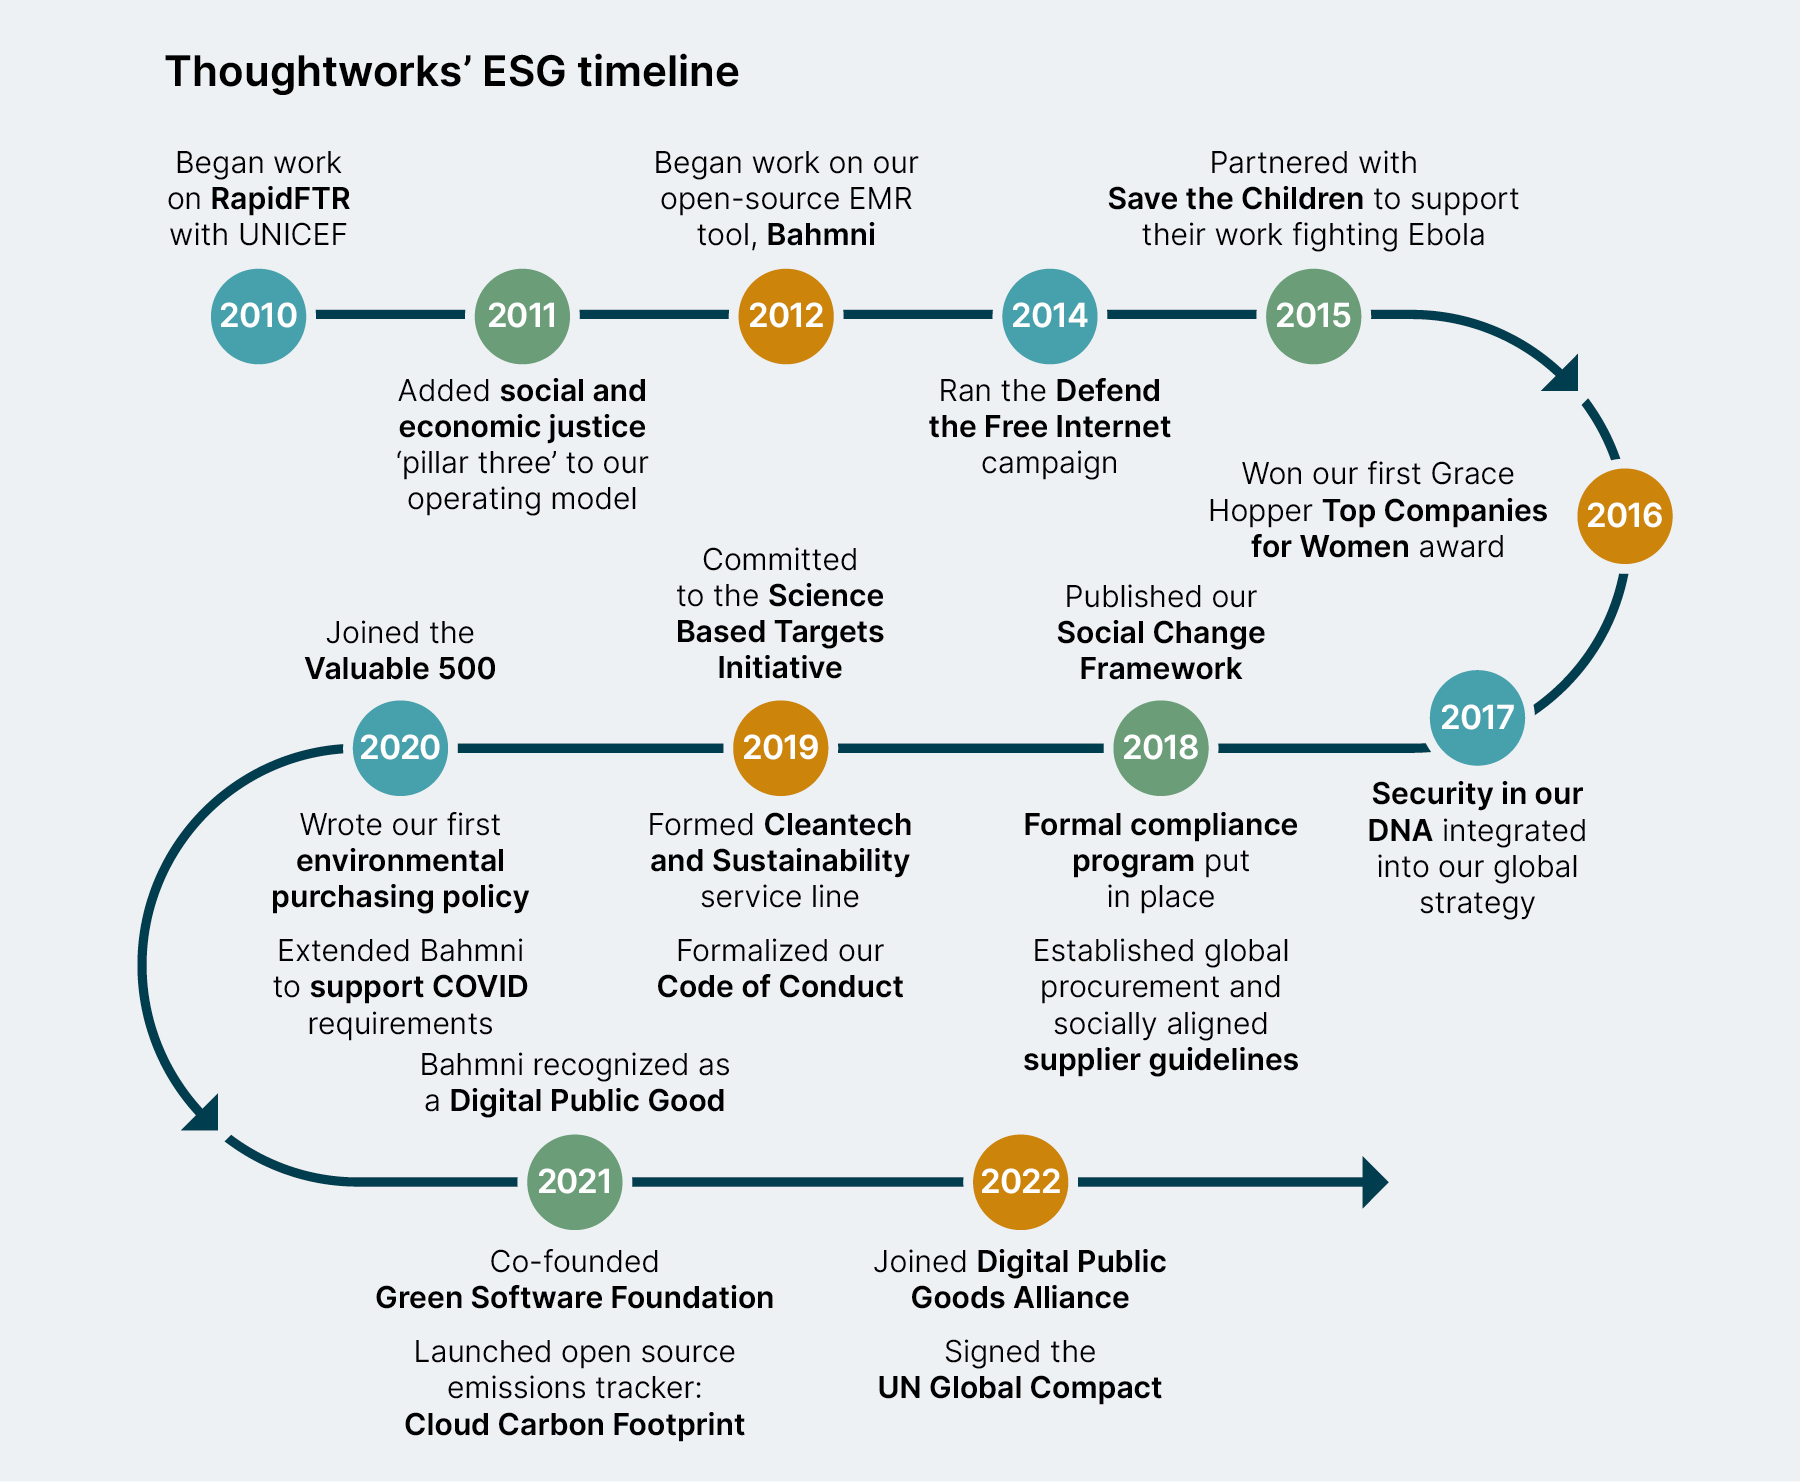 Timeline of Thoughtworks ESG accomplishments and milestones from 2010 to 2022, showing work on Bahmni from 2012 to present day, and other examples